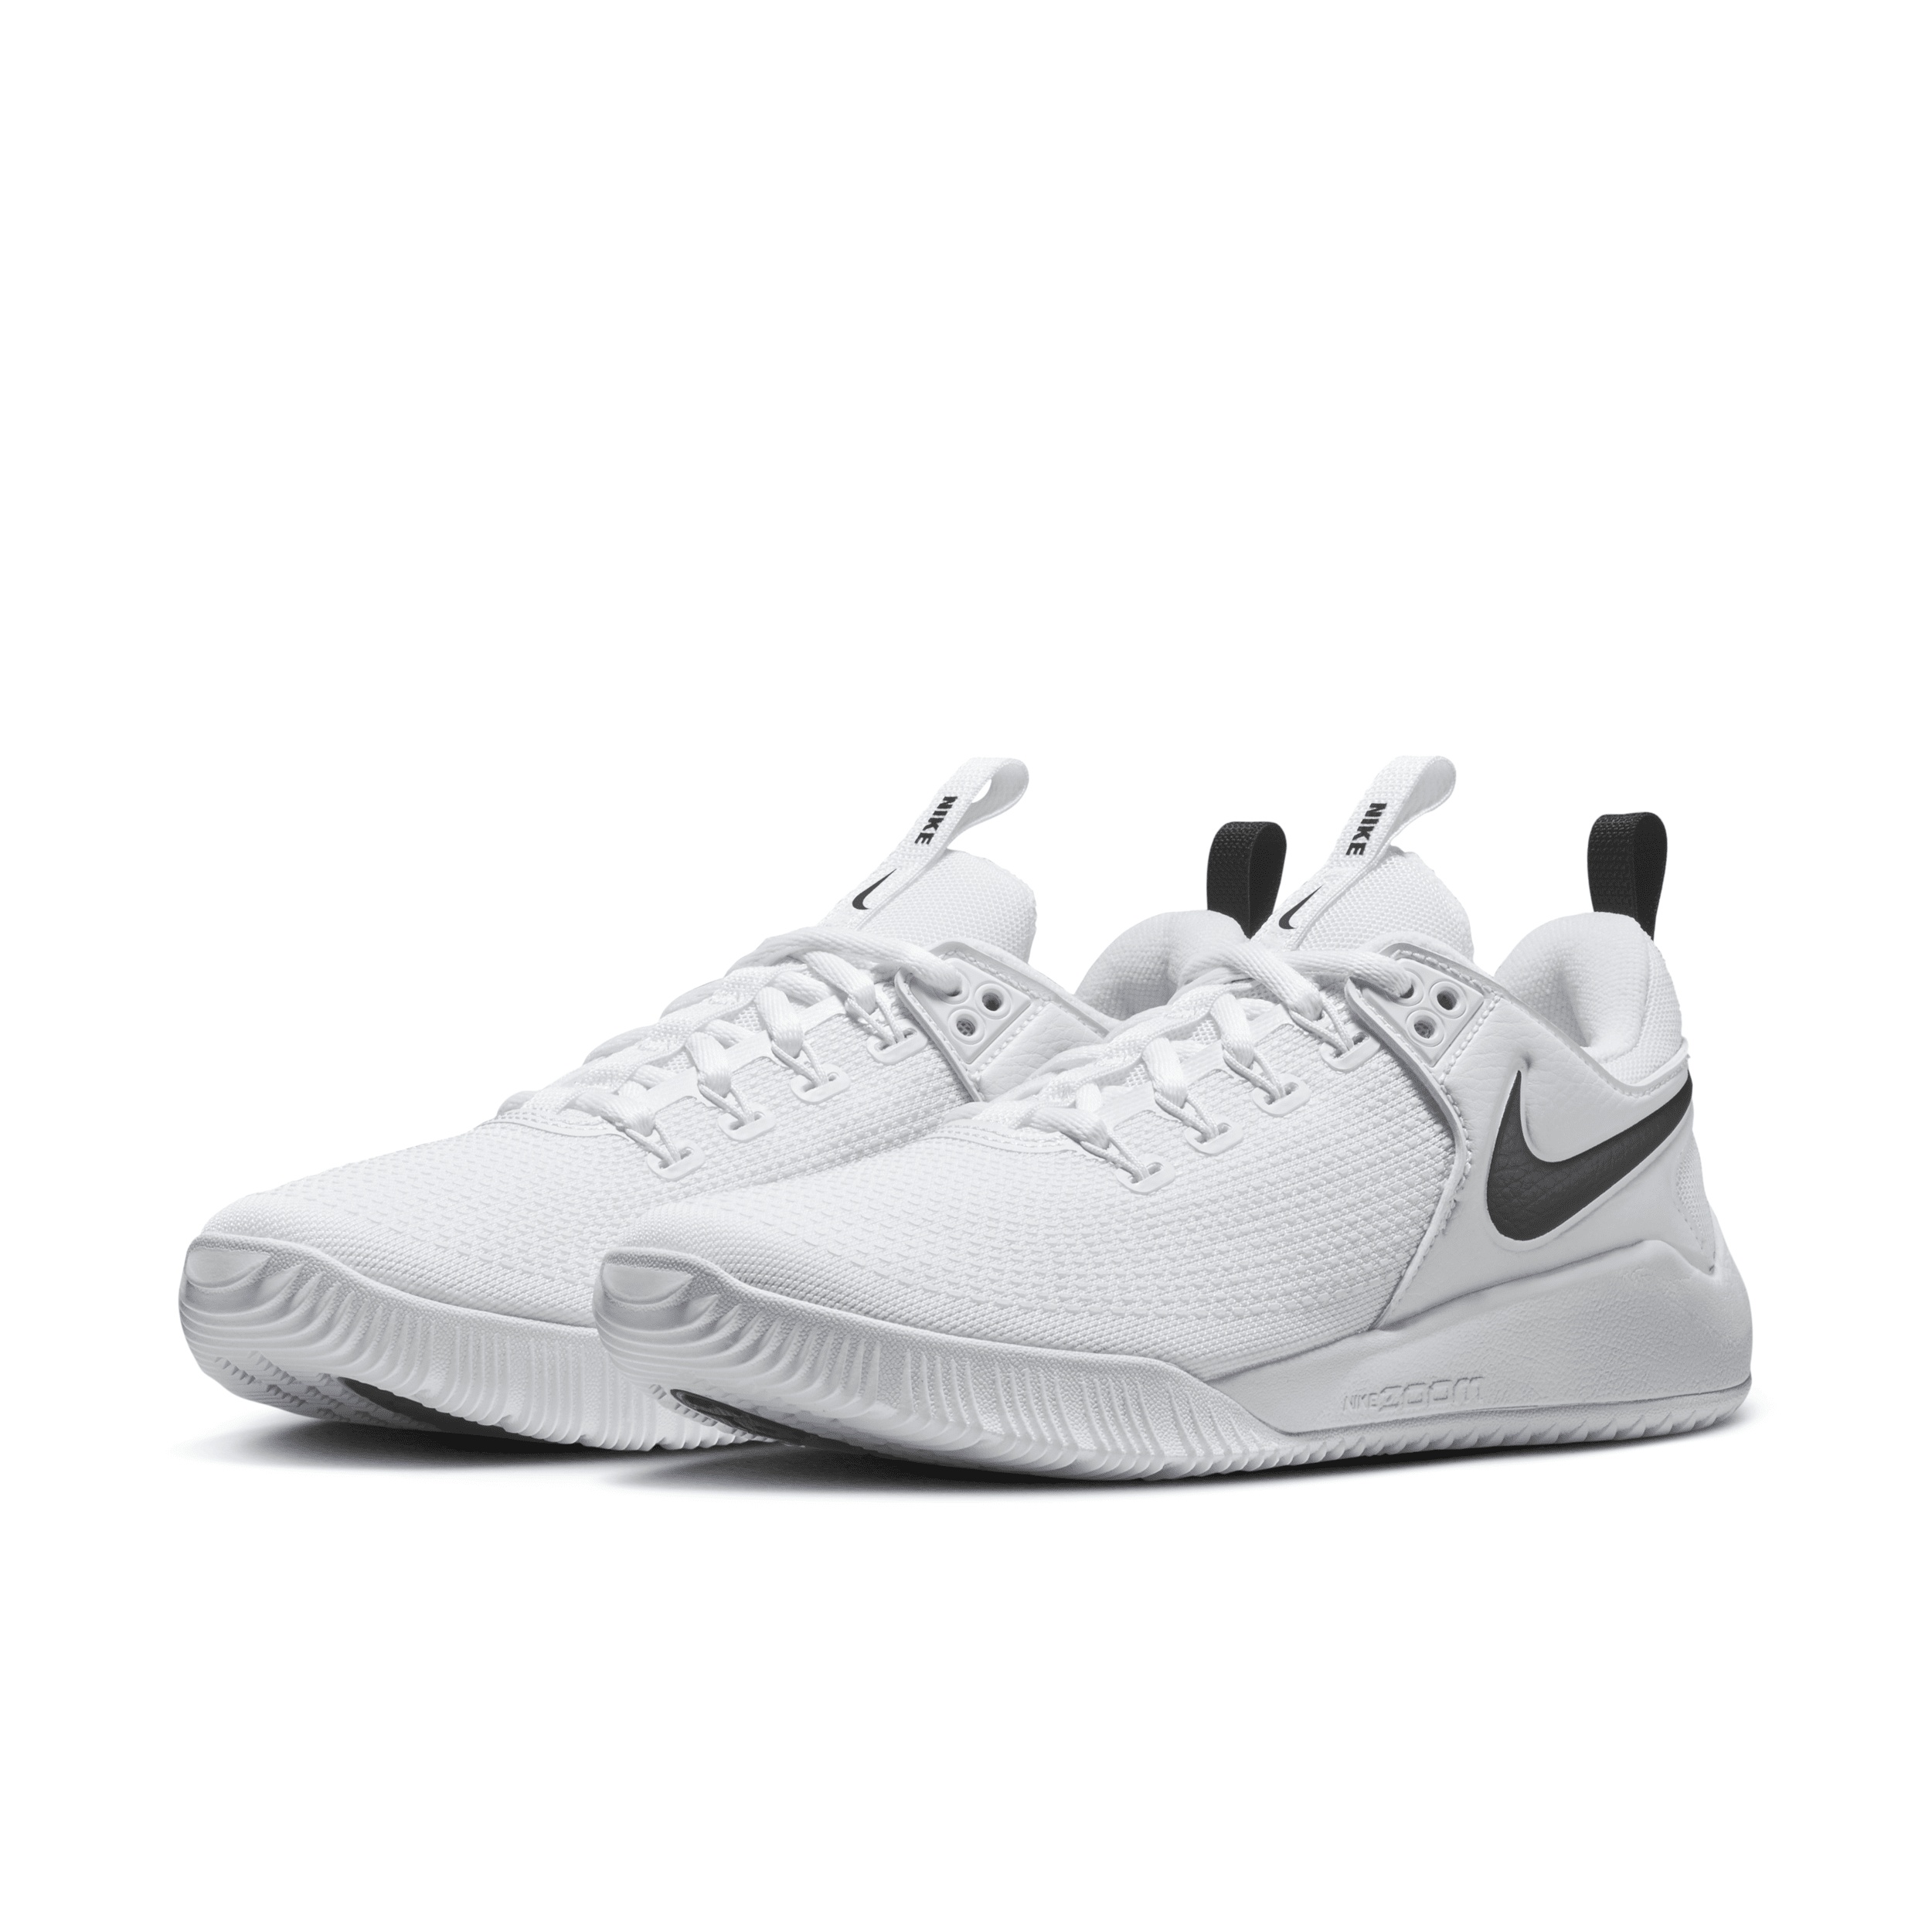 Nike Women's Zoom HyperAce 2 Volleyball Shoes - 5